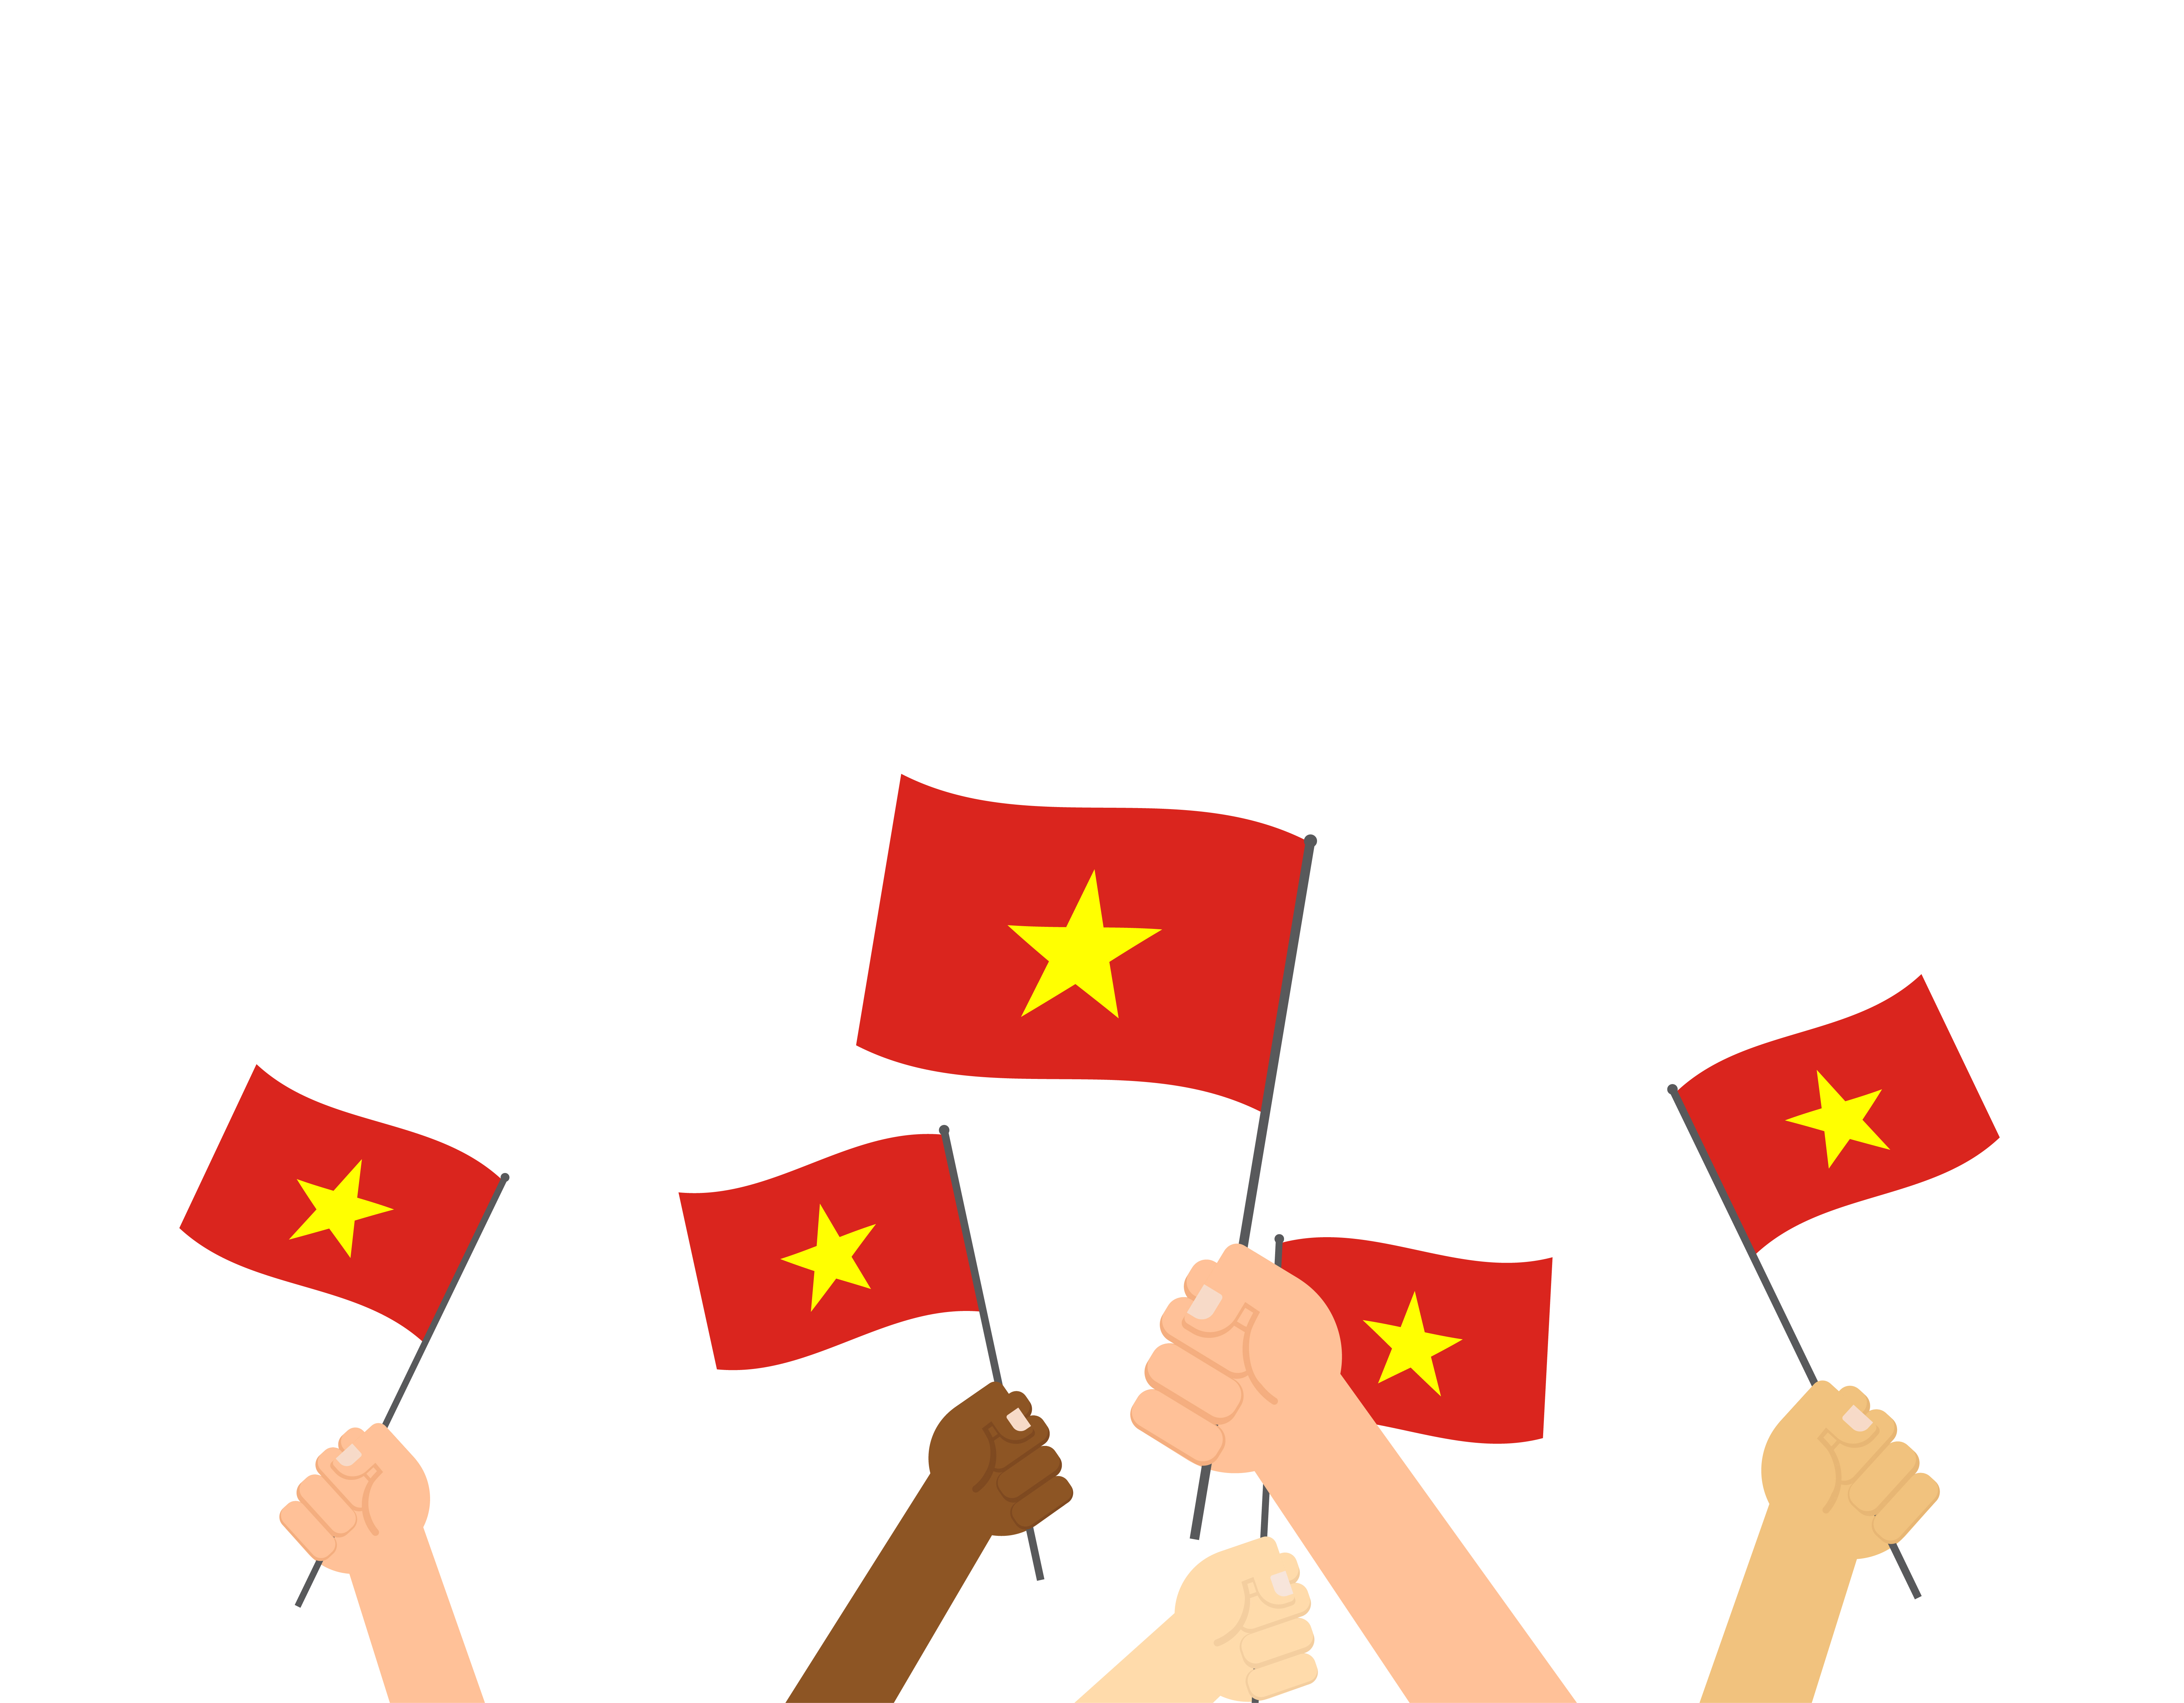 Hands Holding Vietnam Flags Isolated On White Background